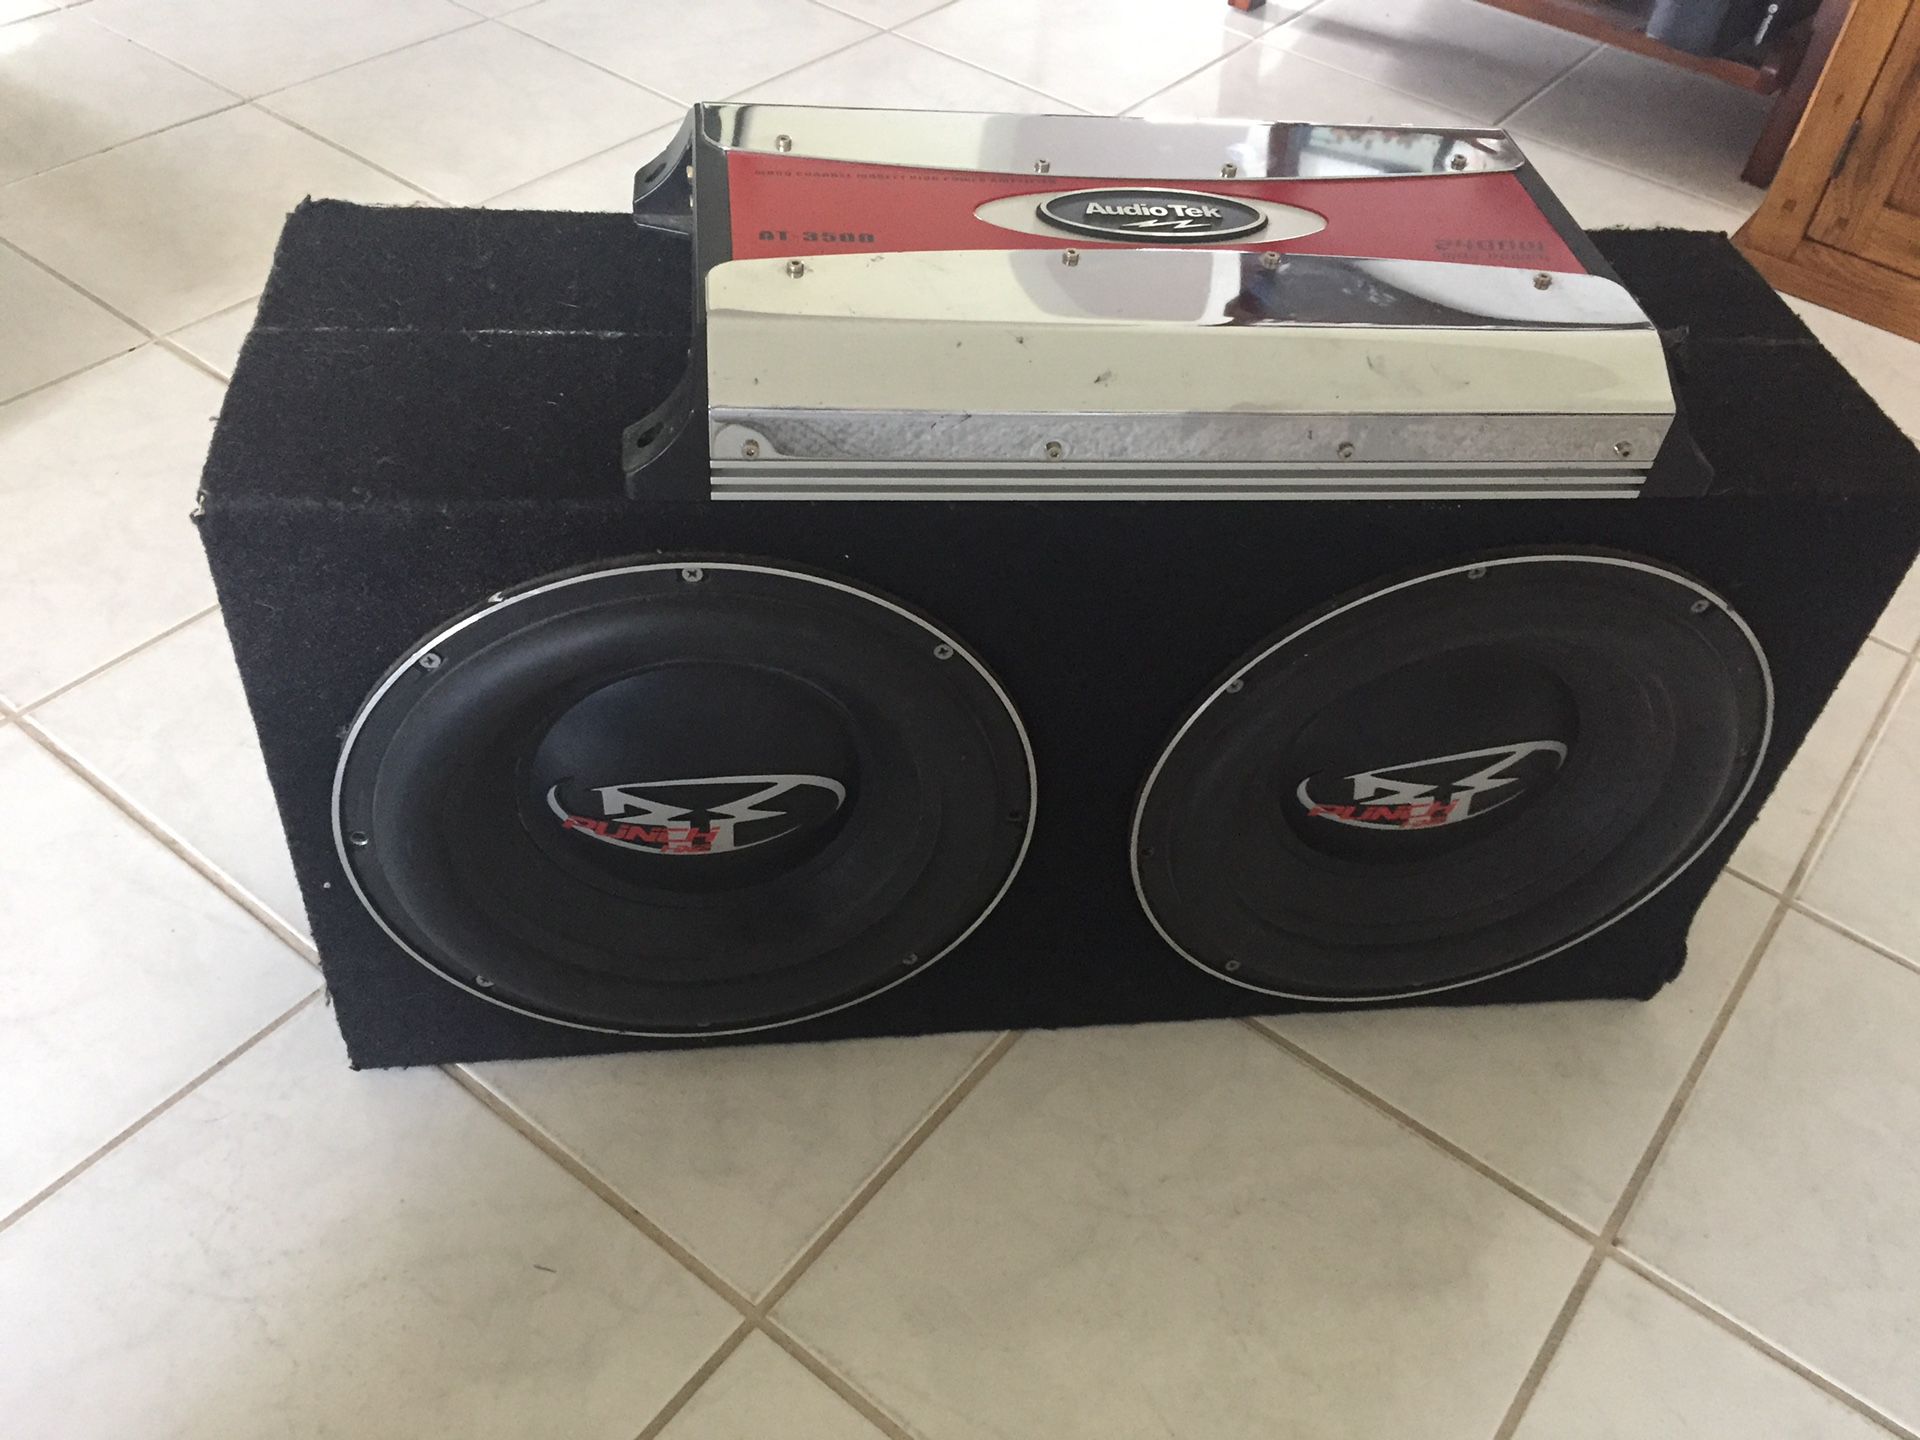 Two 12” Subwoofers with 2400w amp + miscellaneous